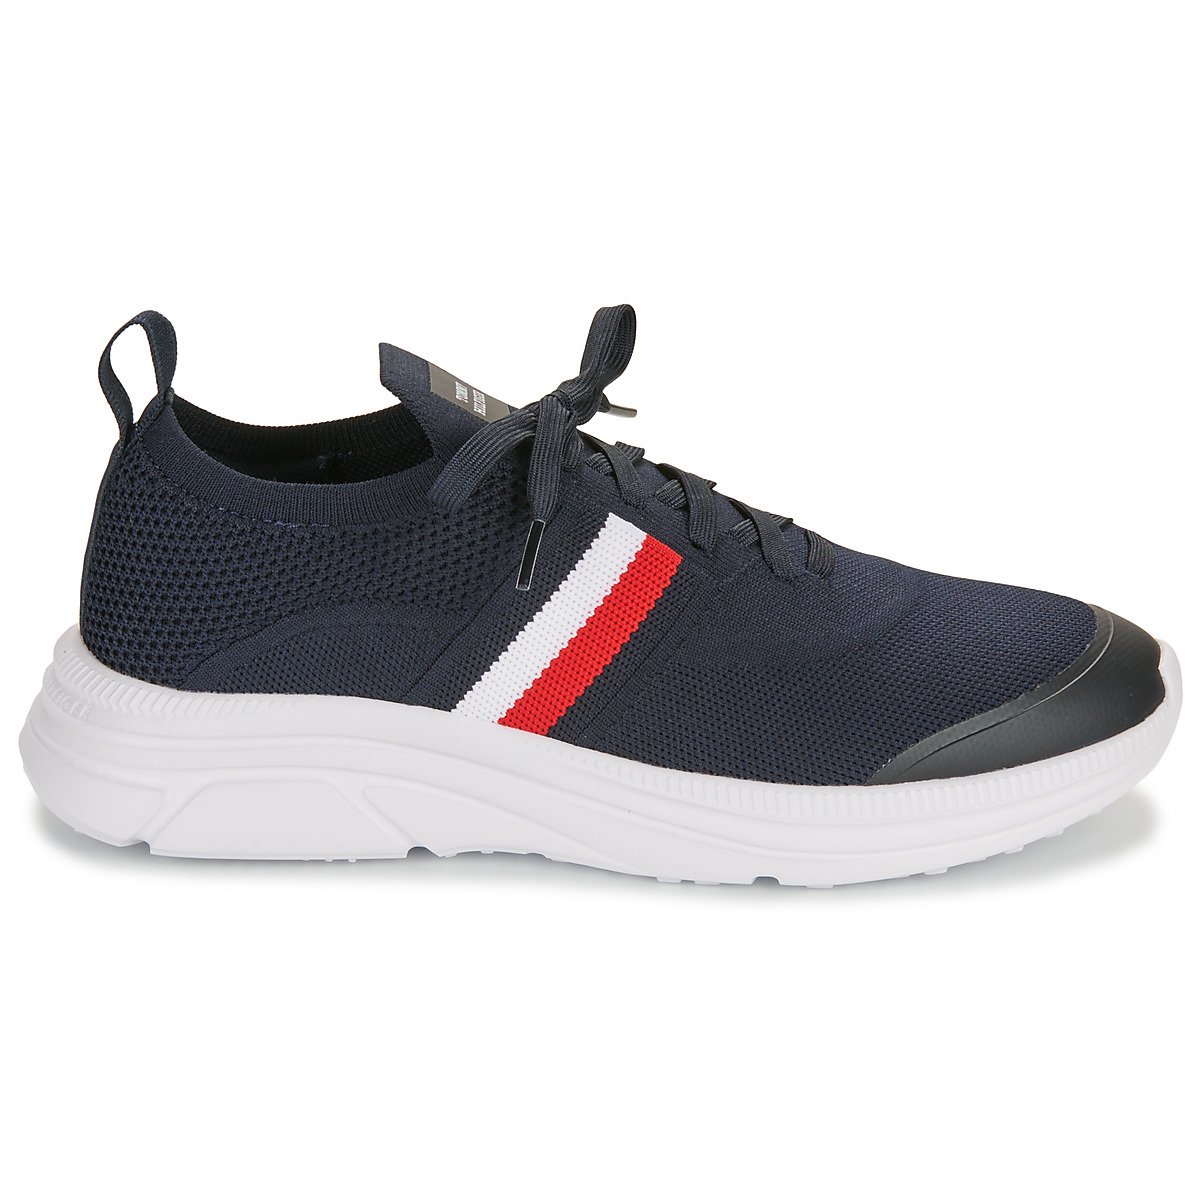 Shoes (Trainers) MODERN RUNNER KNIT STRIPES